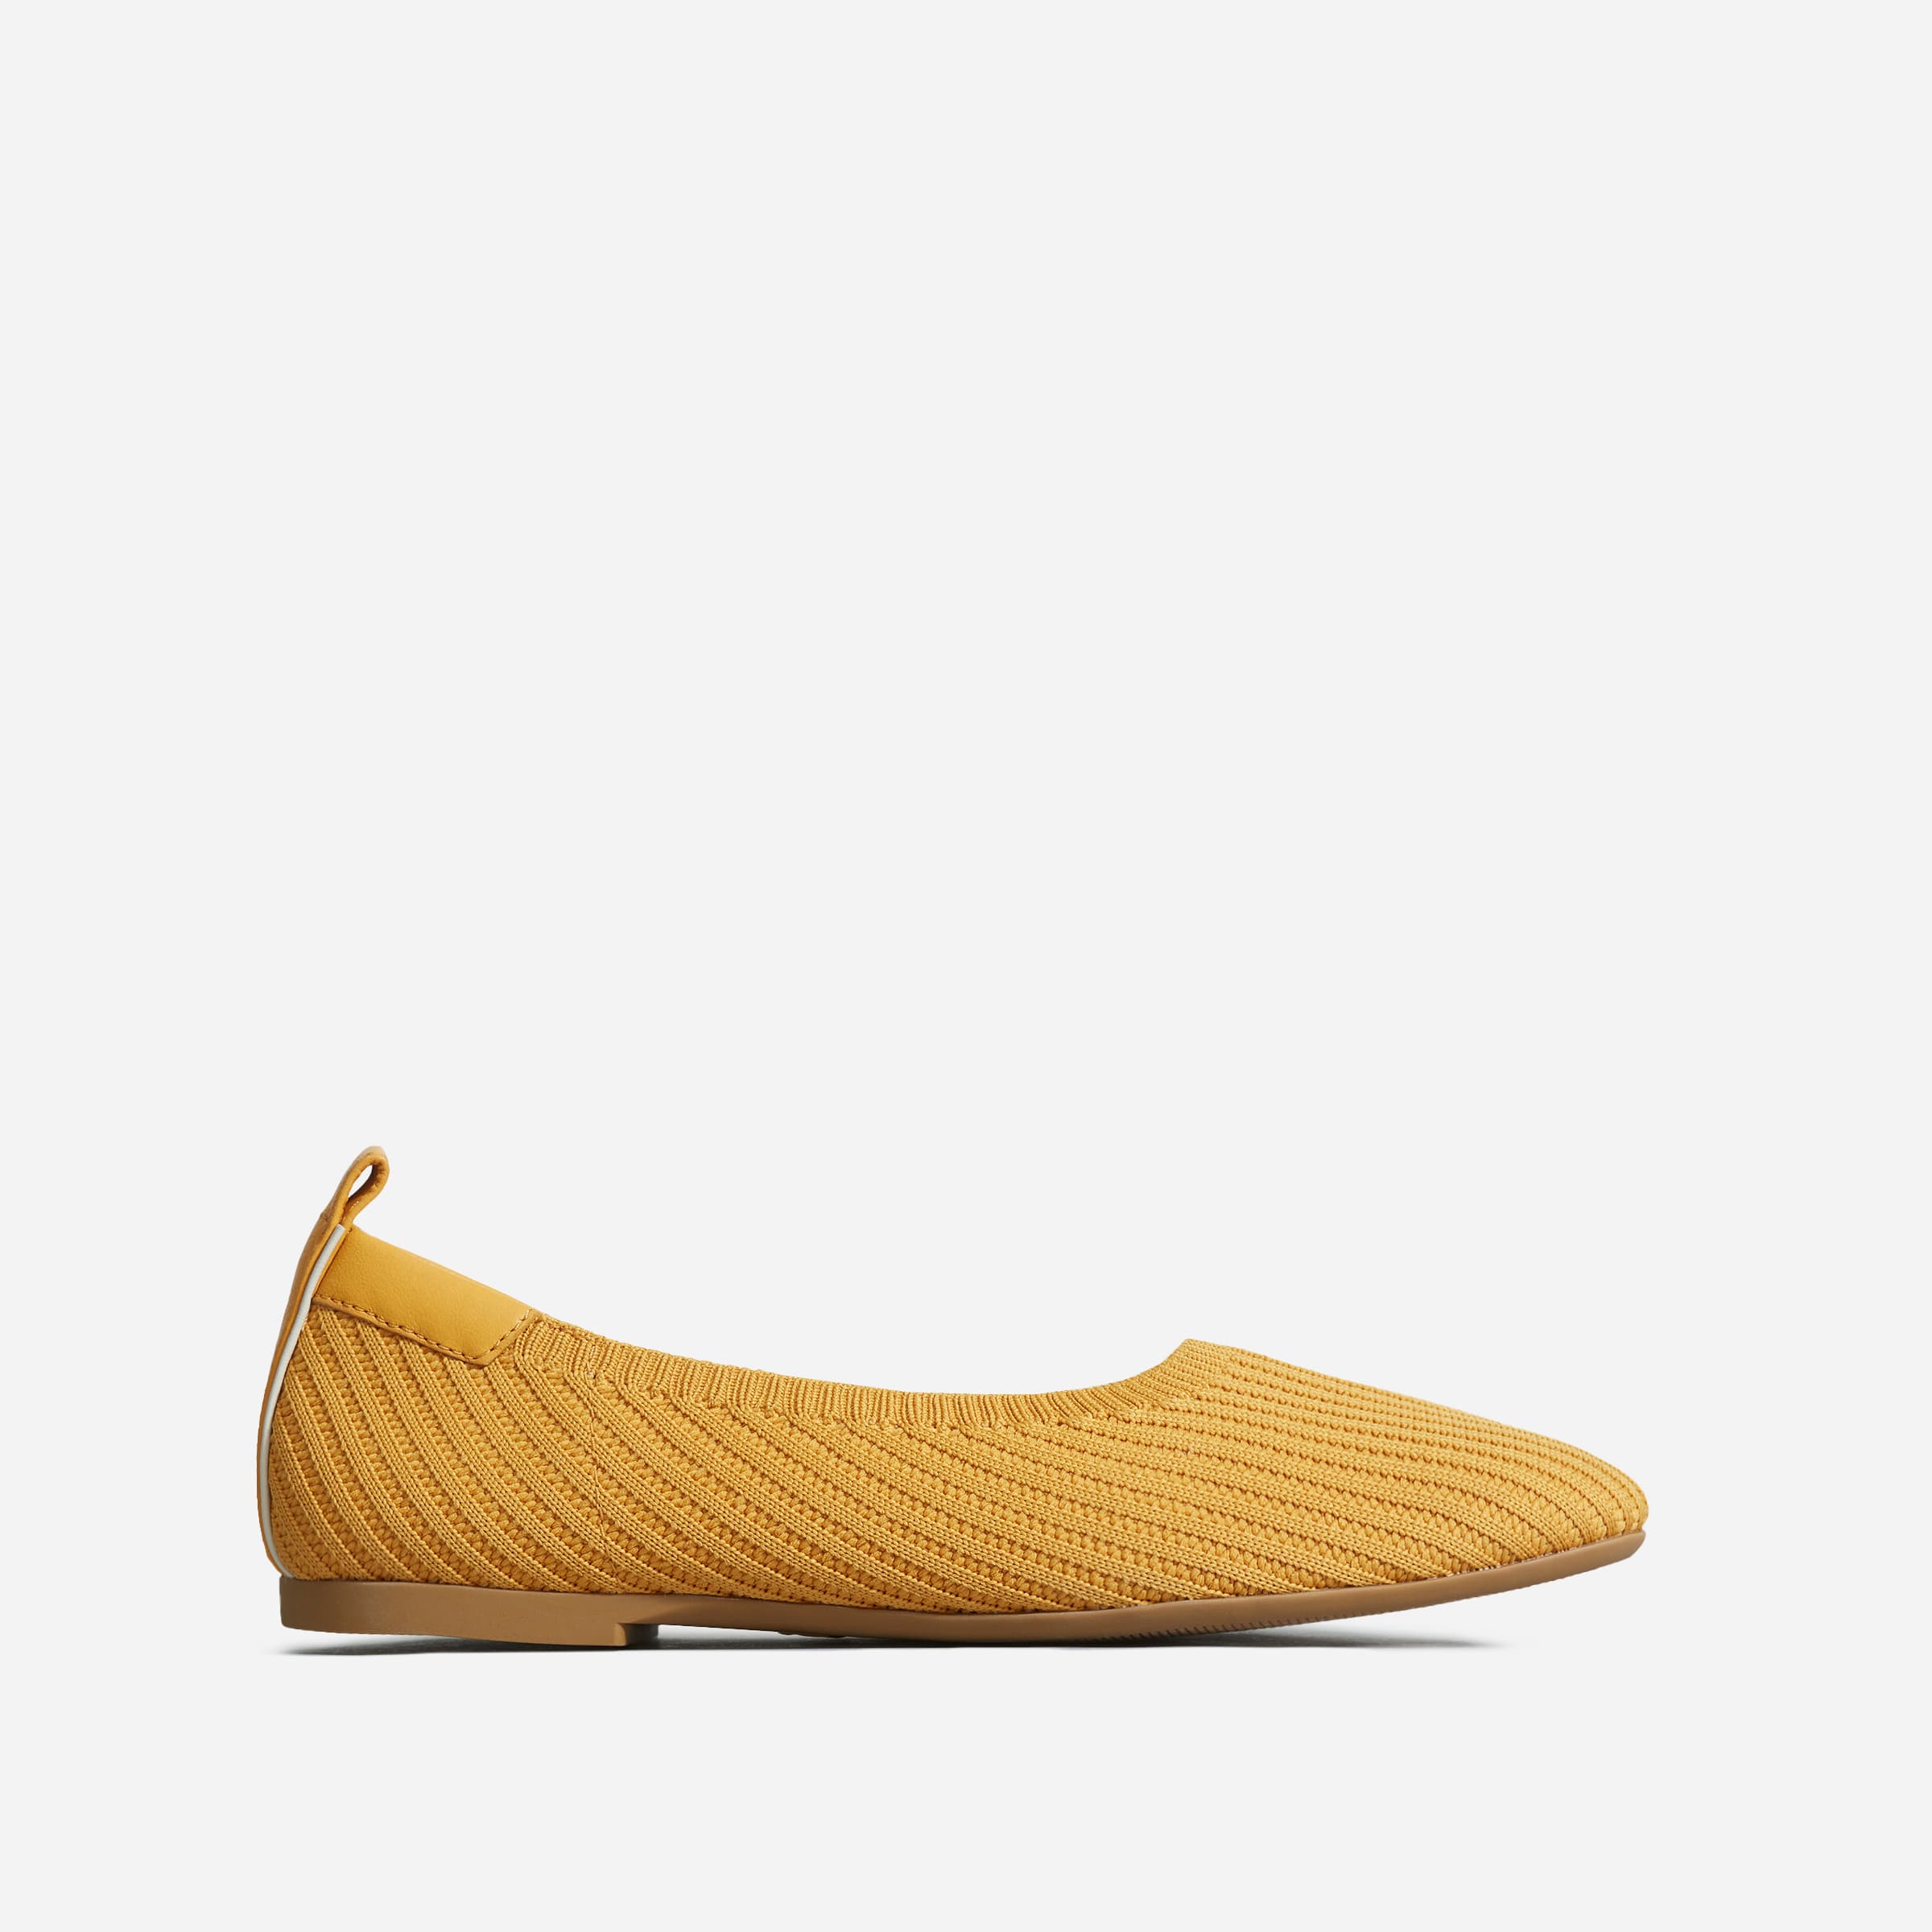 everlane knit shoes